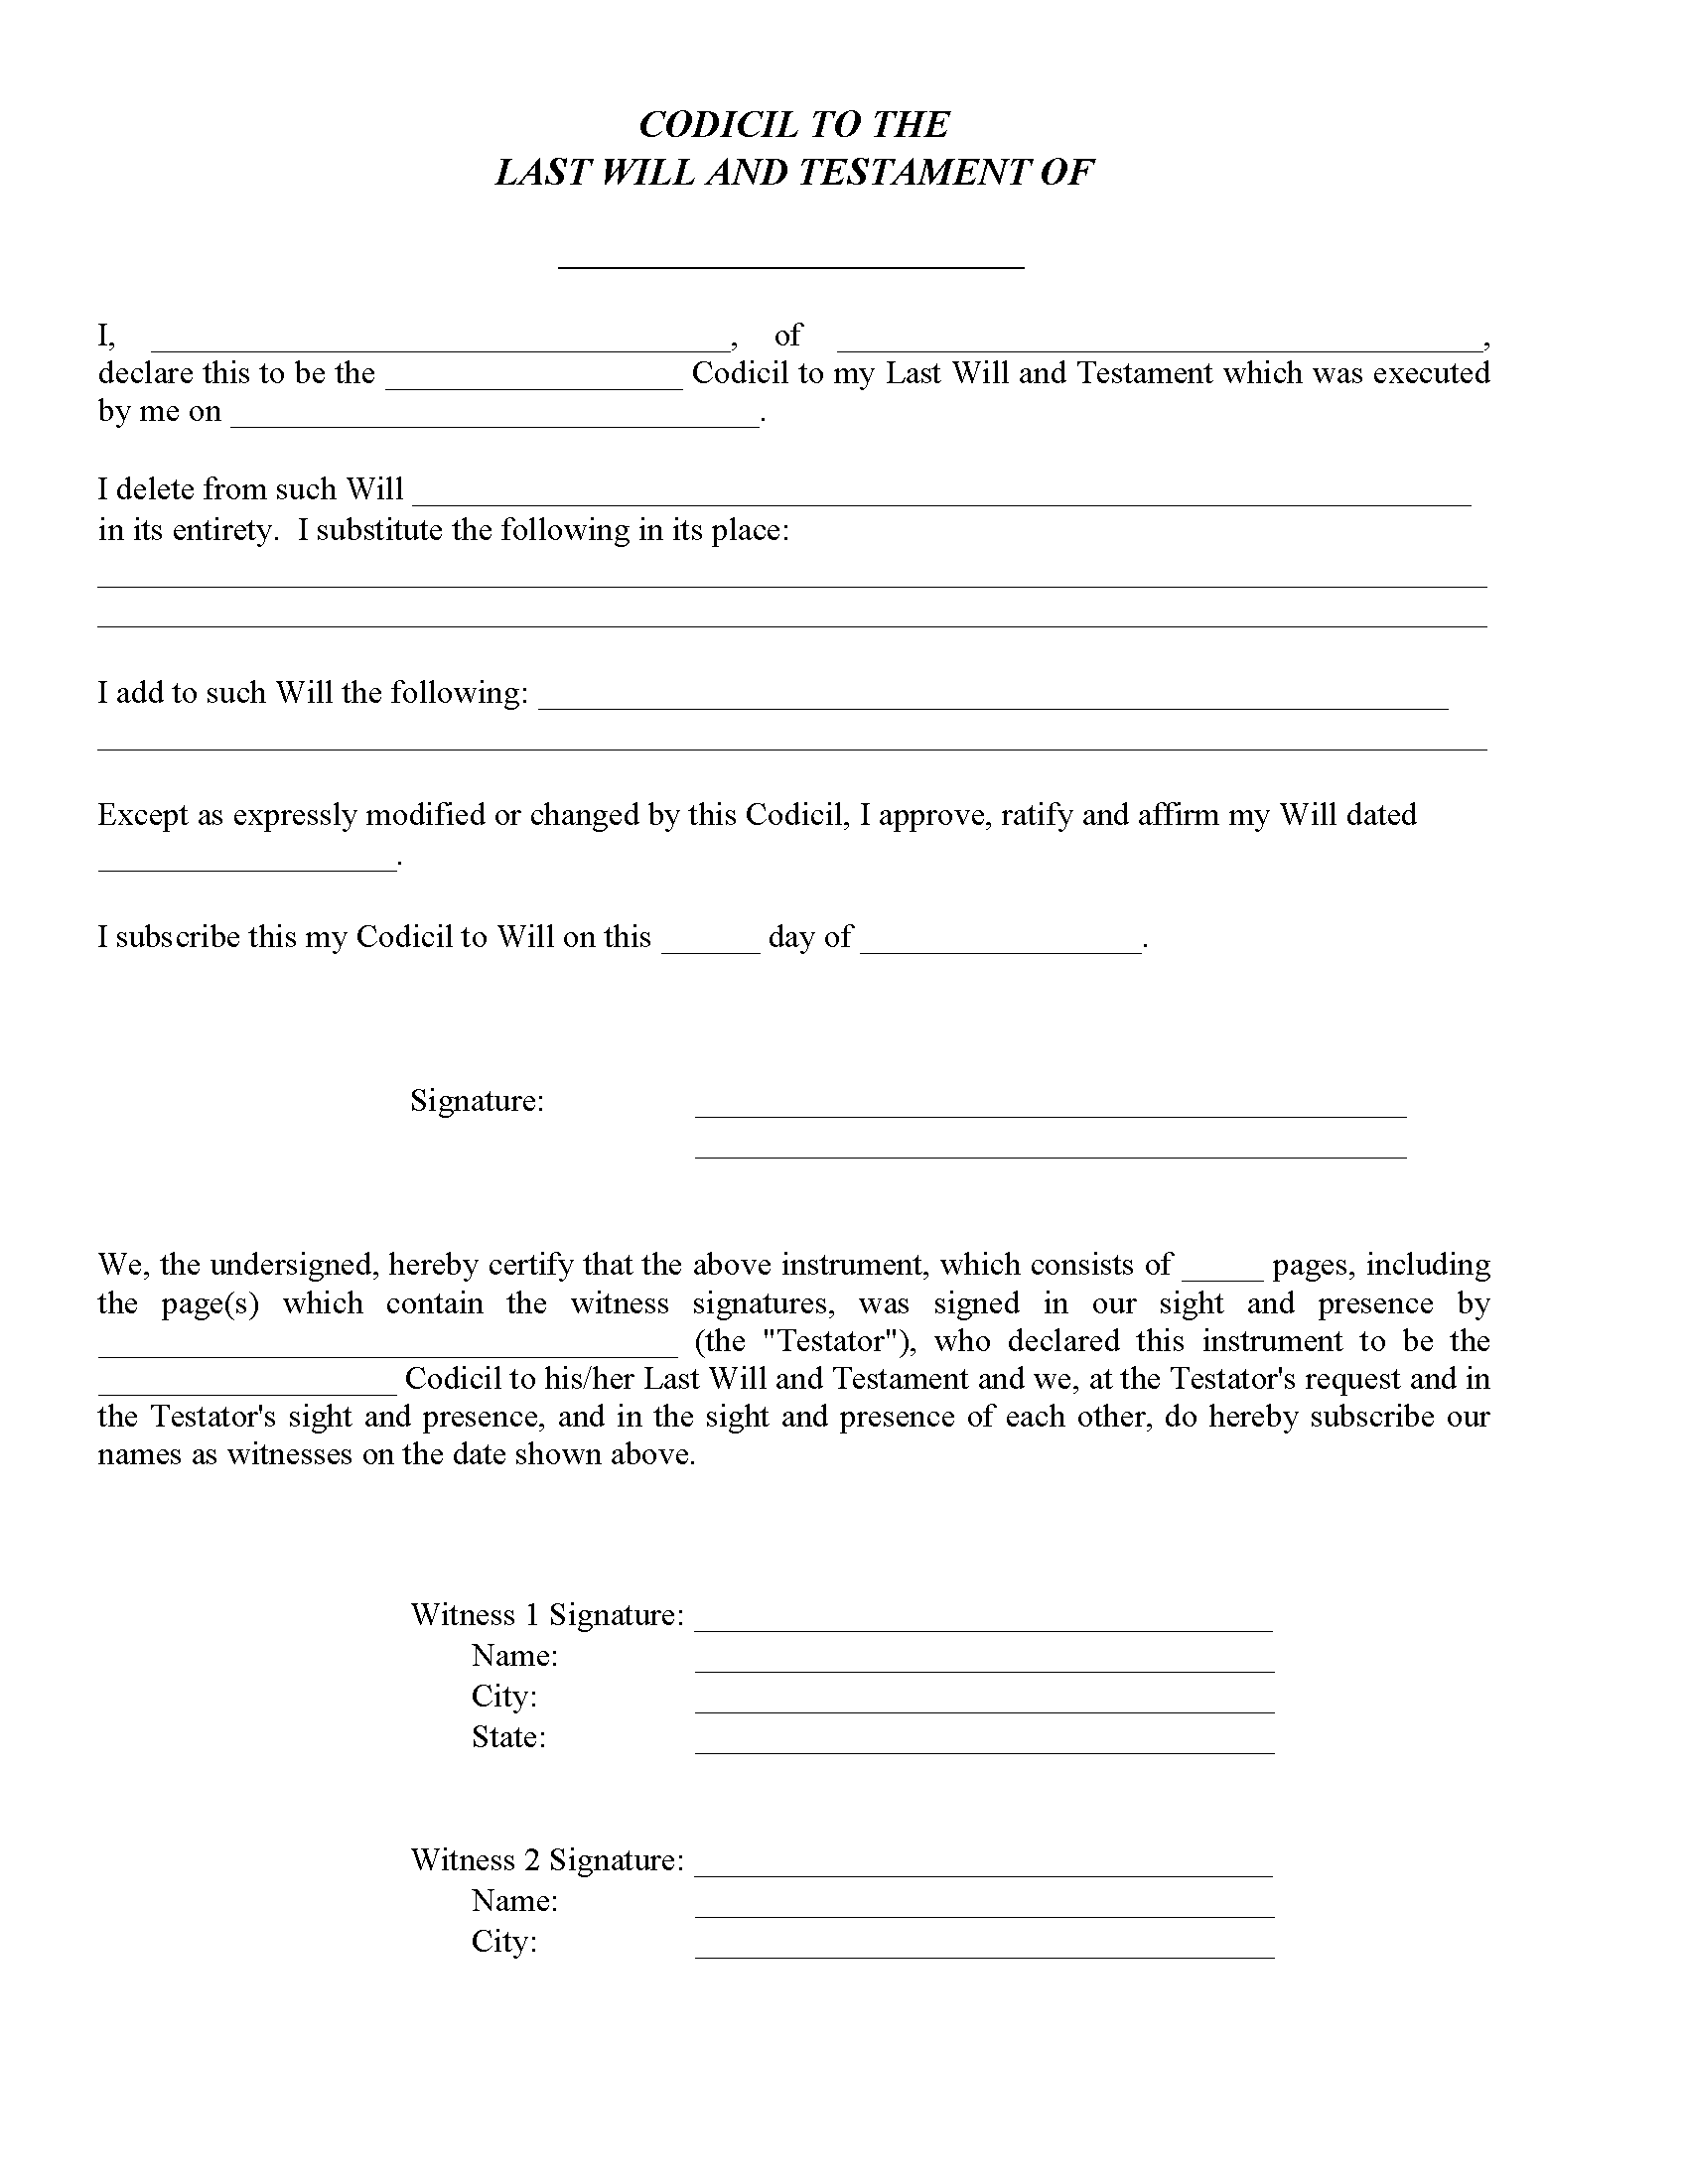 florida-codicil-to-will-form-free-printable-legal-forms